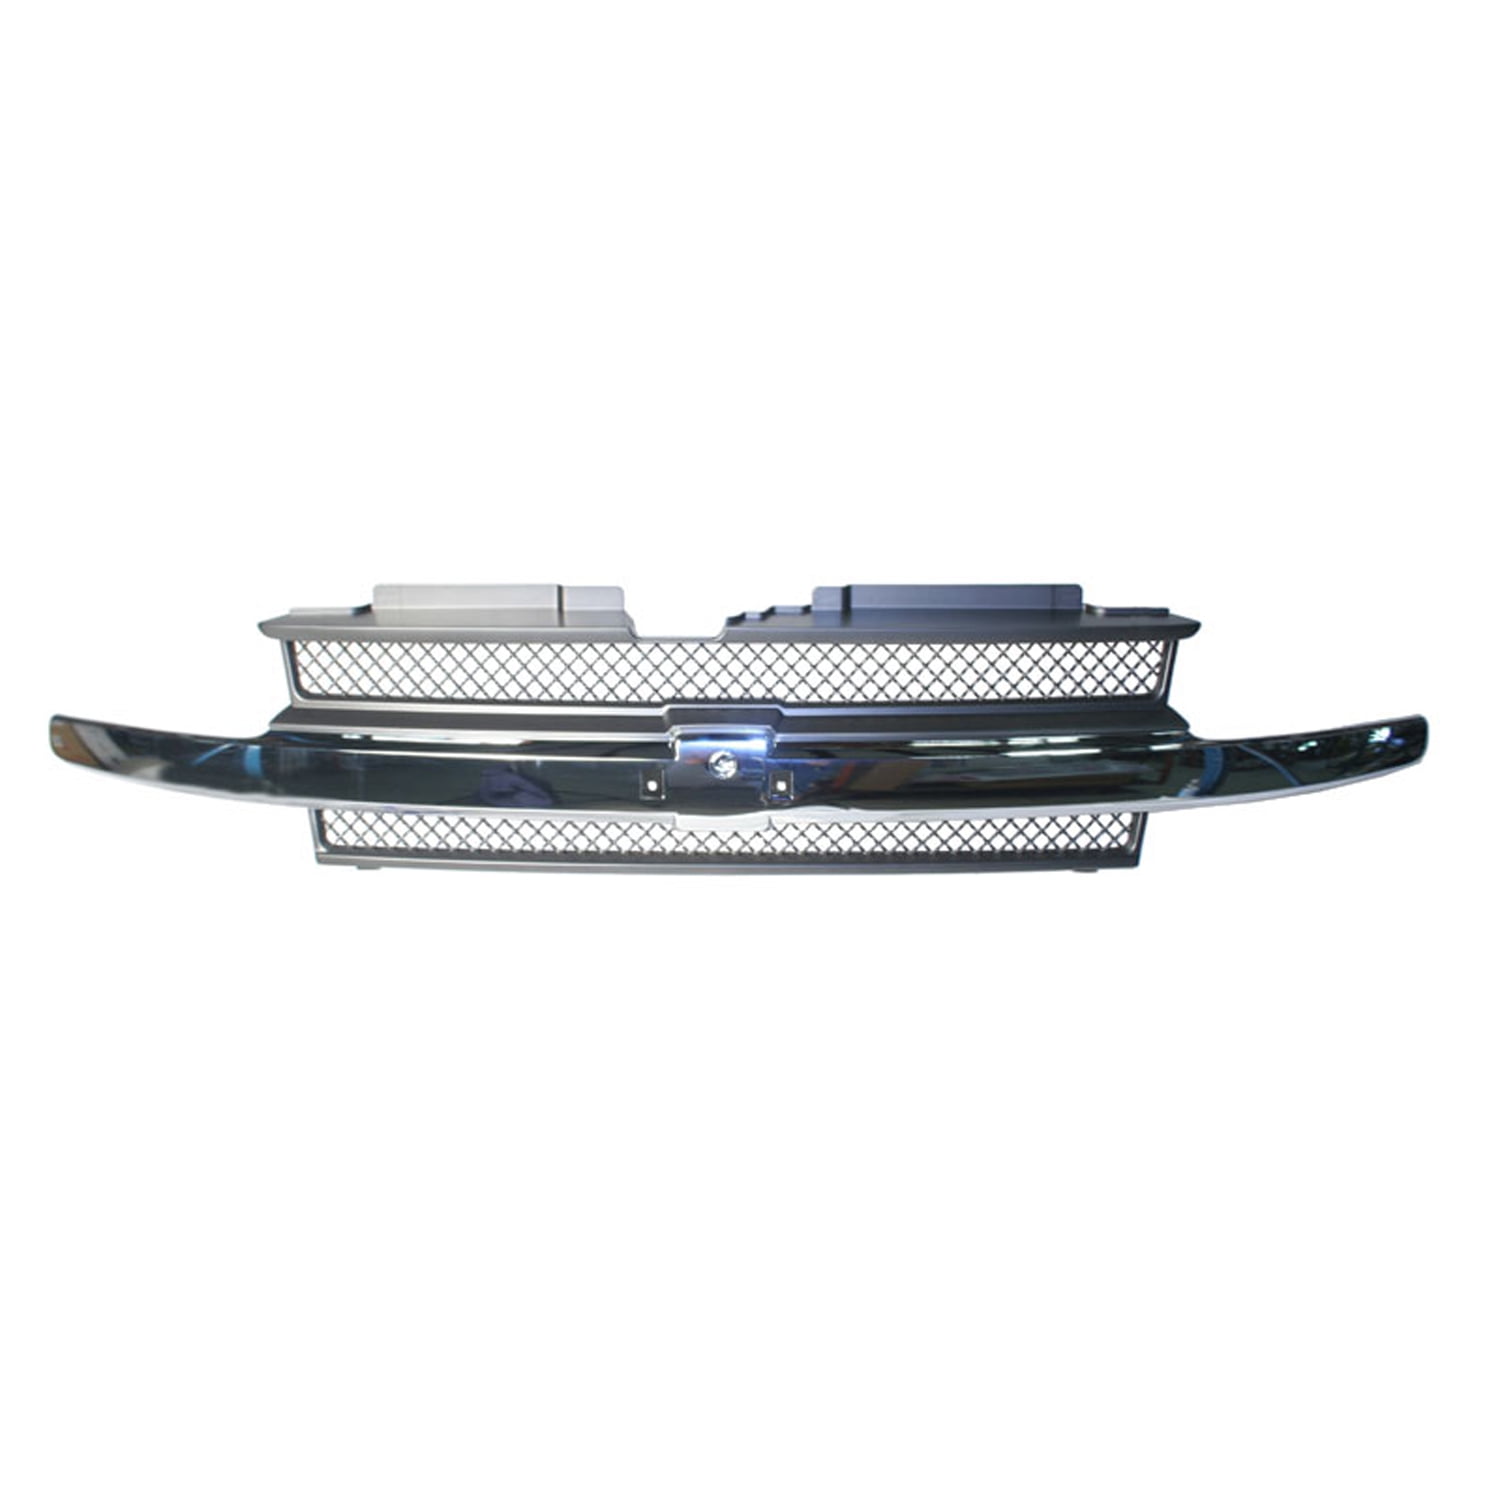 New Standard Replacement Front Grille Fits 2002 2007 Chevrolet